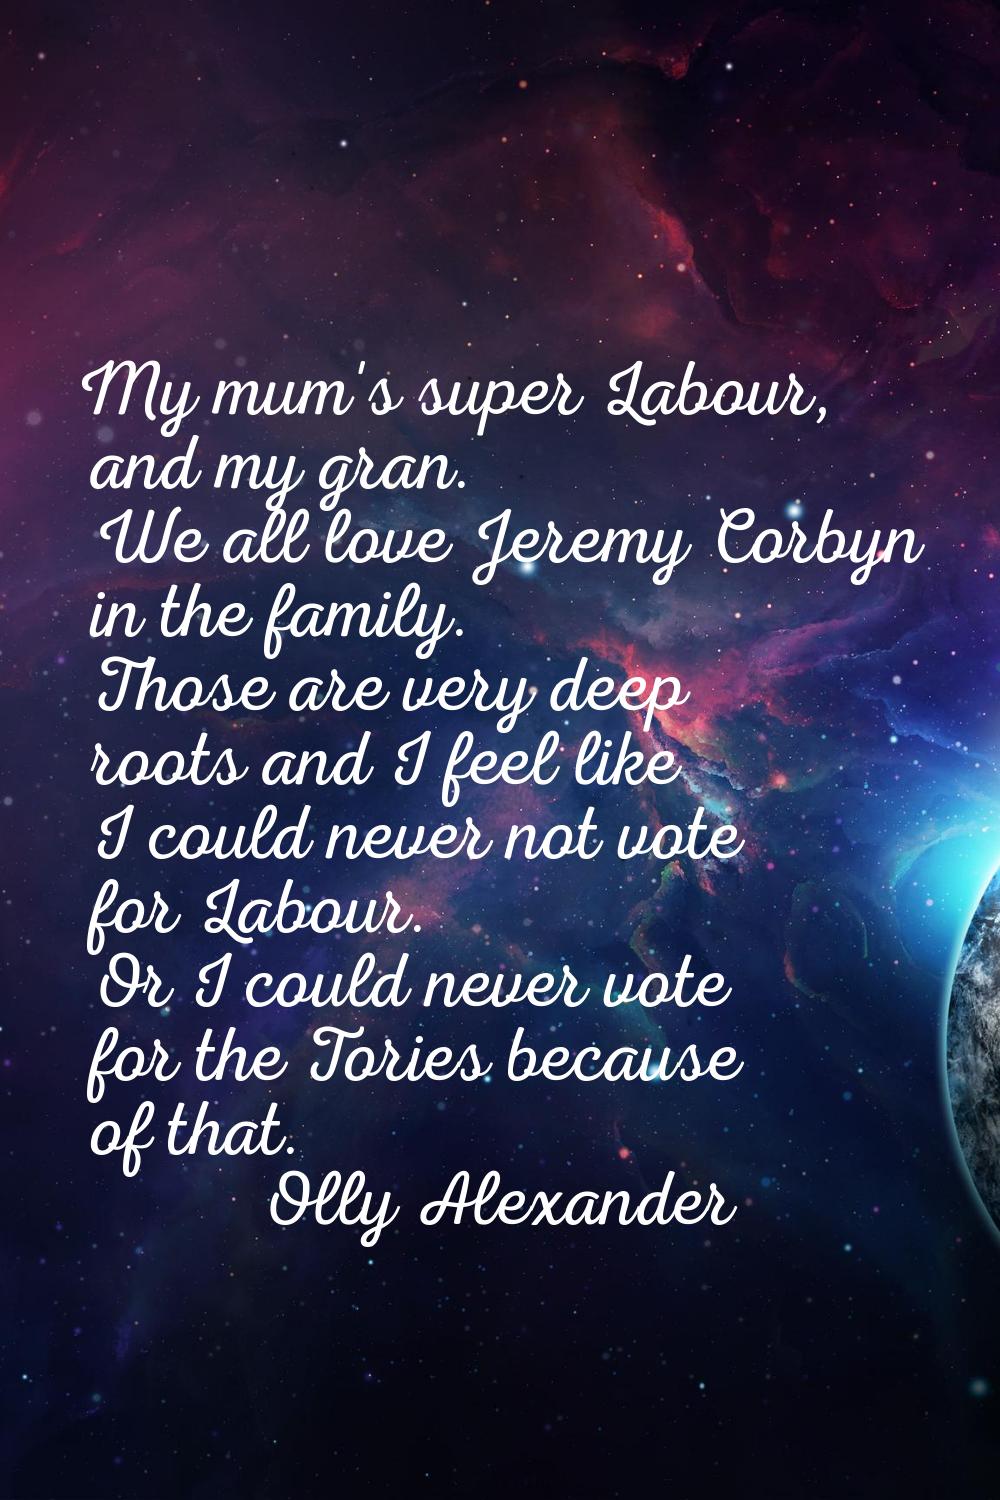 My mum's super Labour, and my gran. We all love Jeremy Corbyn in the family. Those are very deep ro